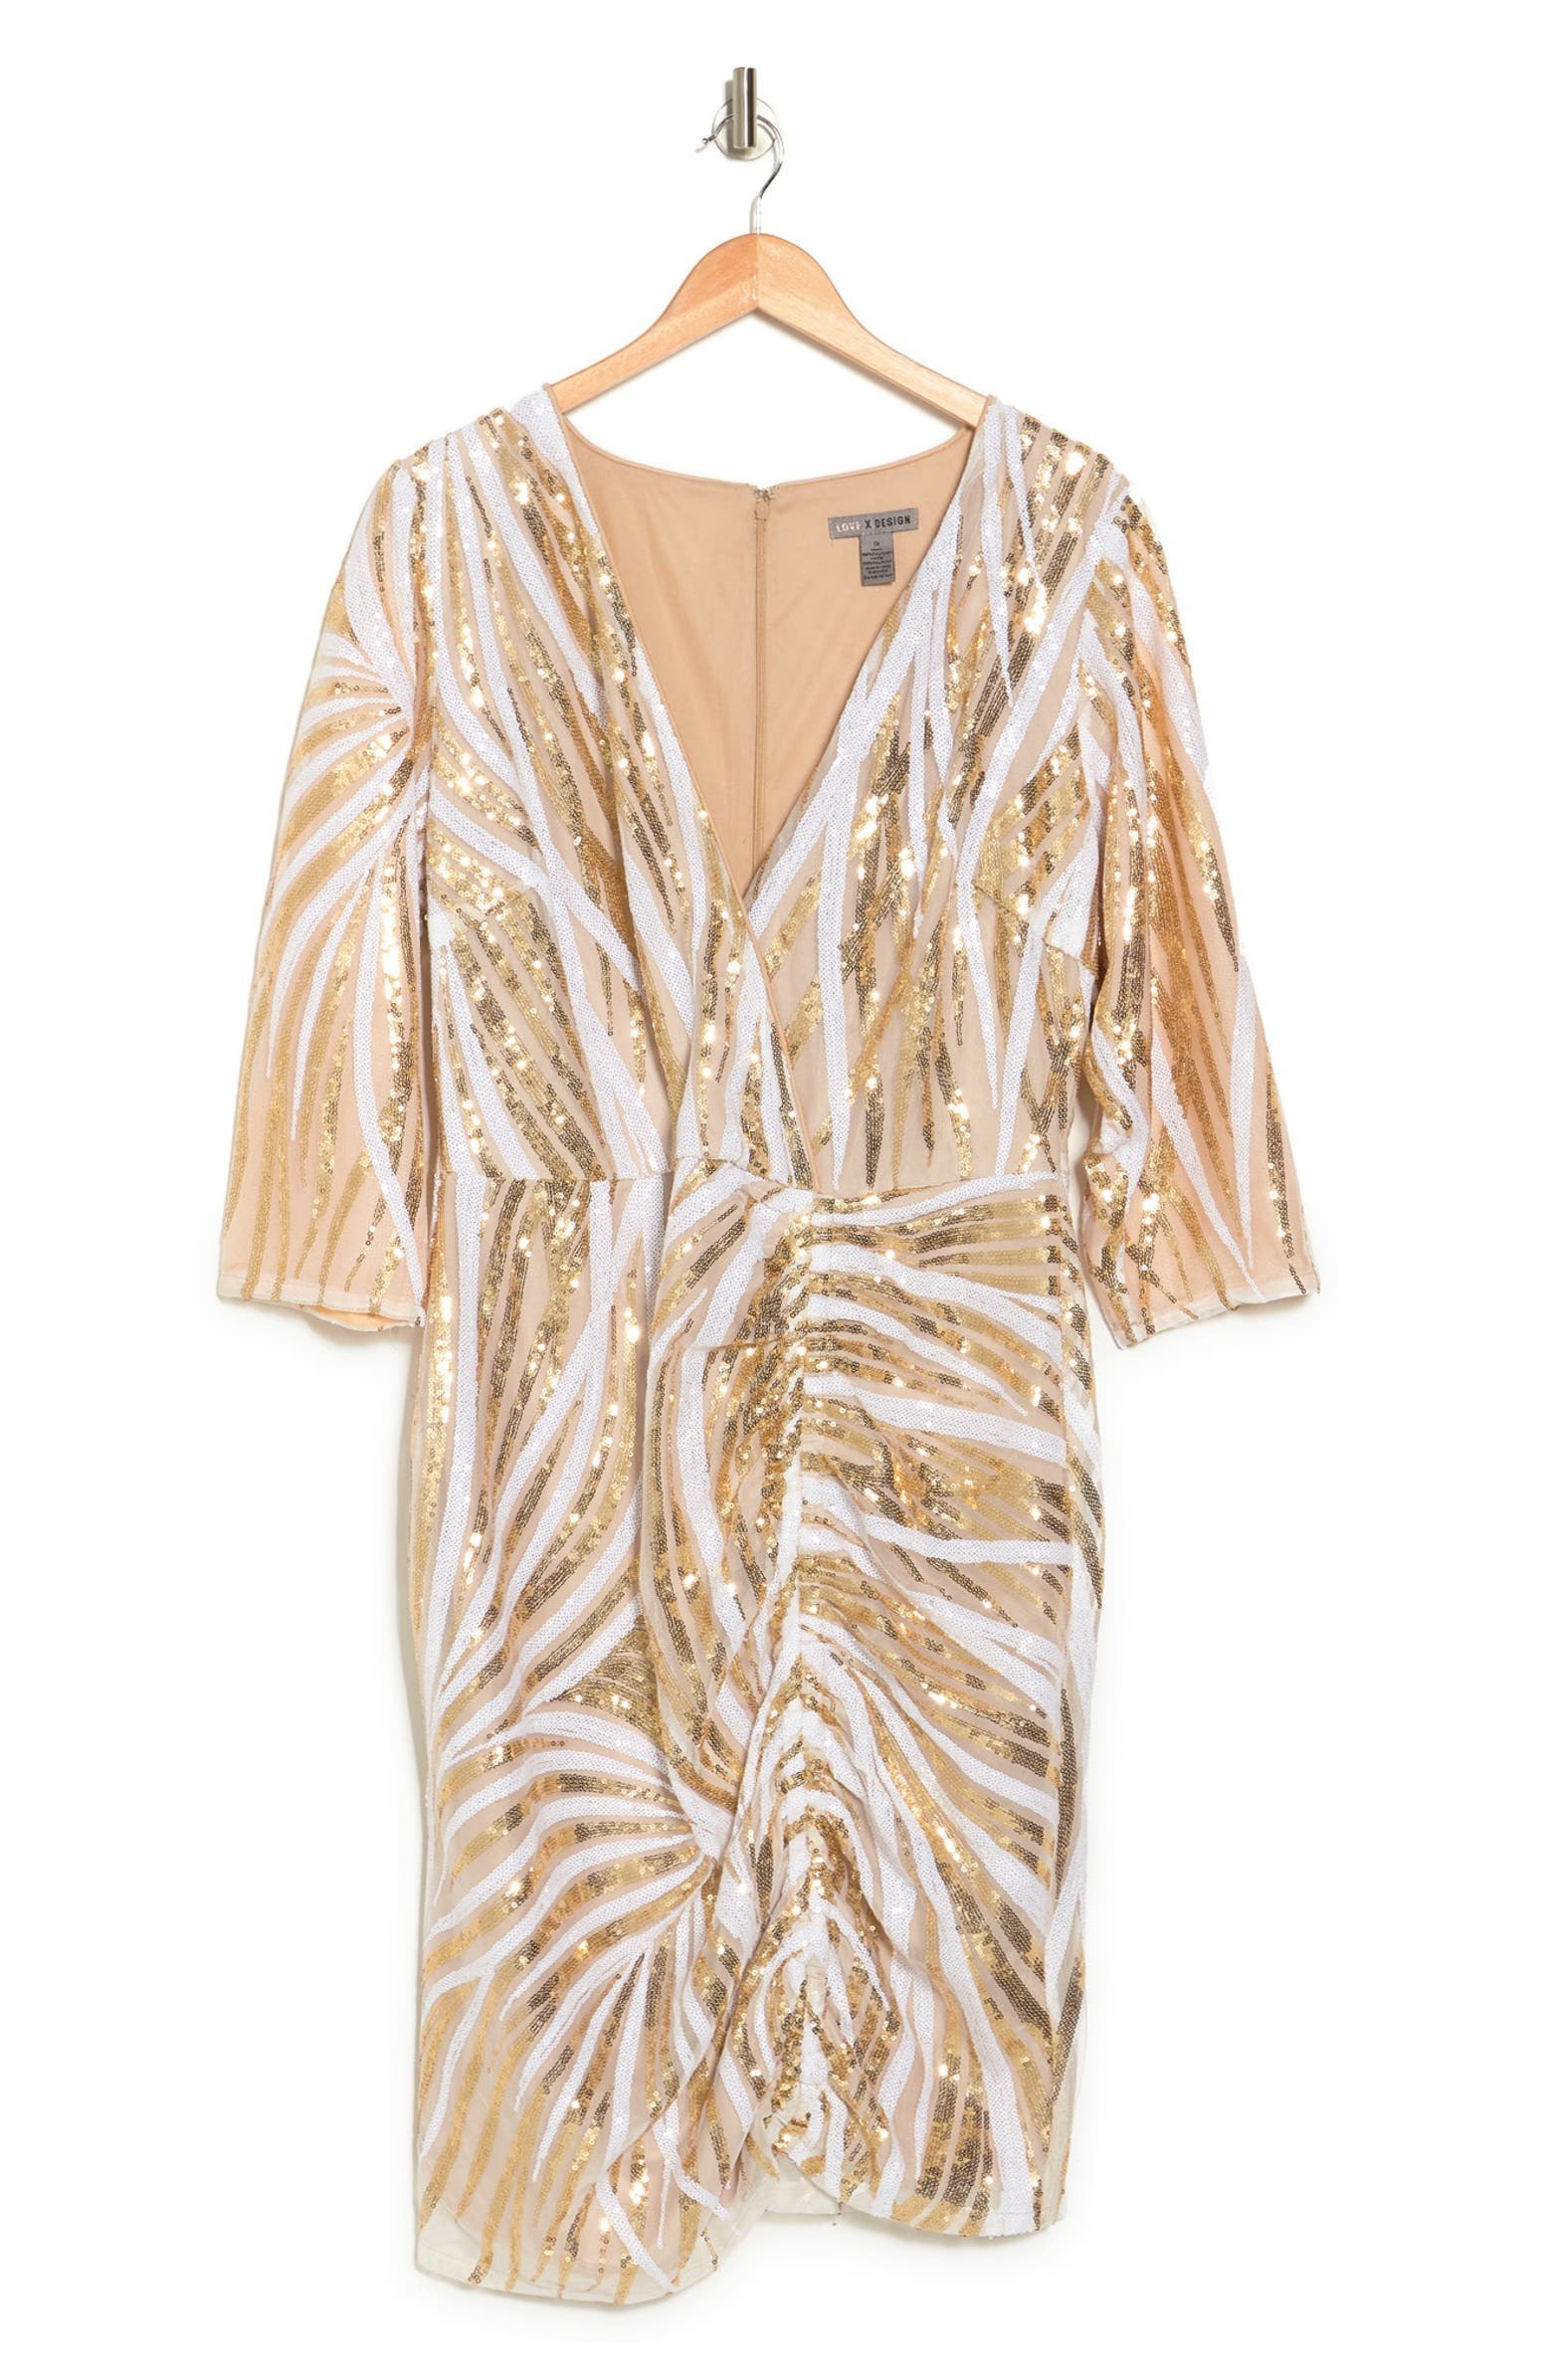 short white midi sleeve dress with a pattern of gold sequins covering a majority of it